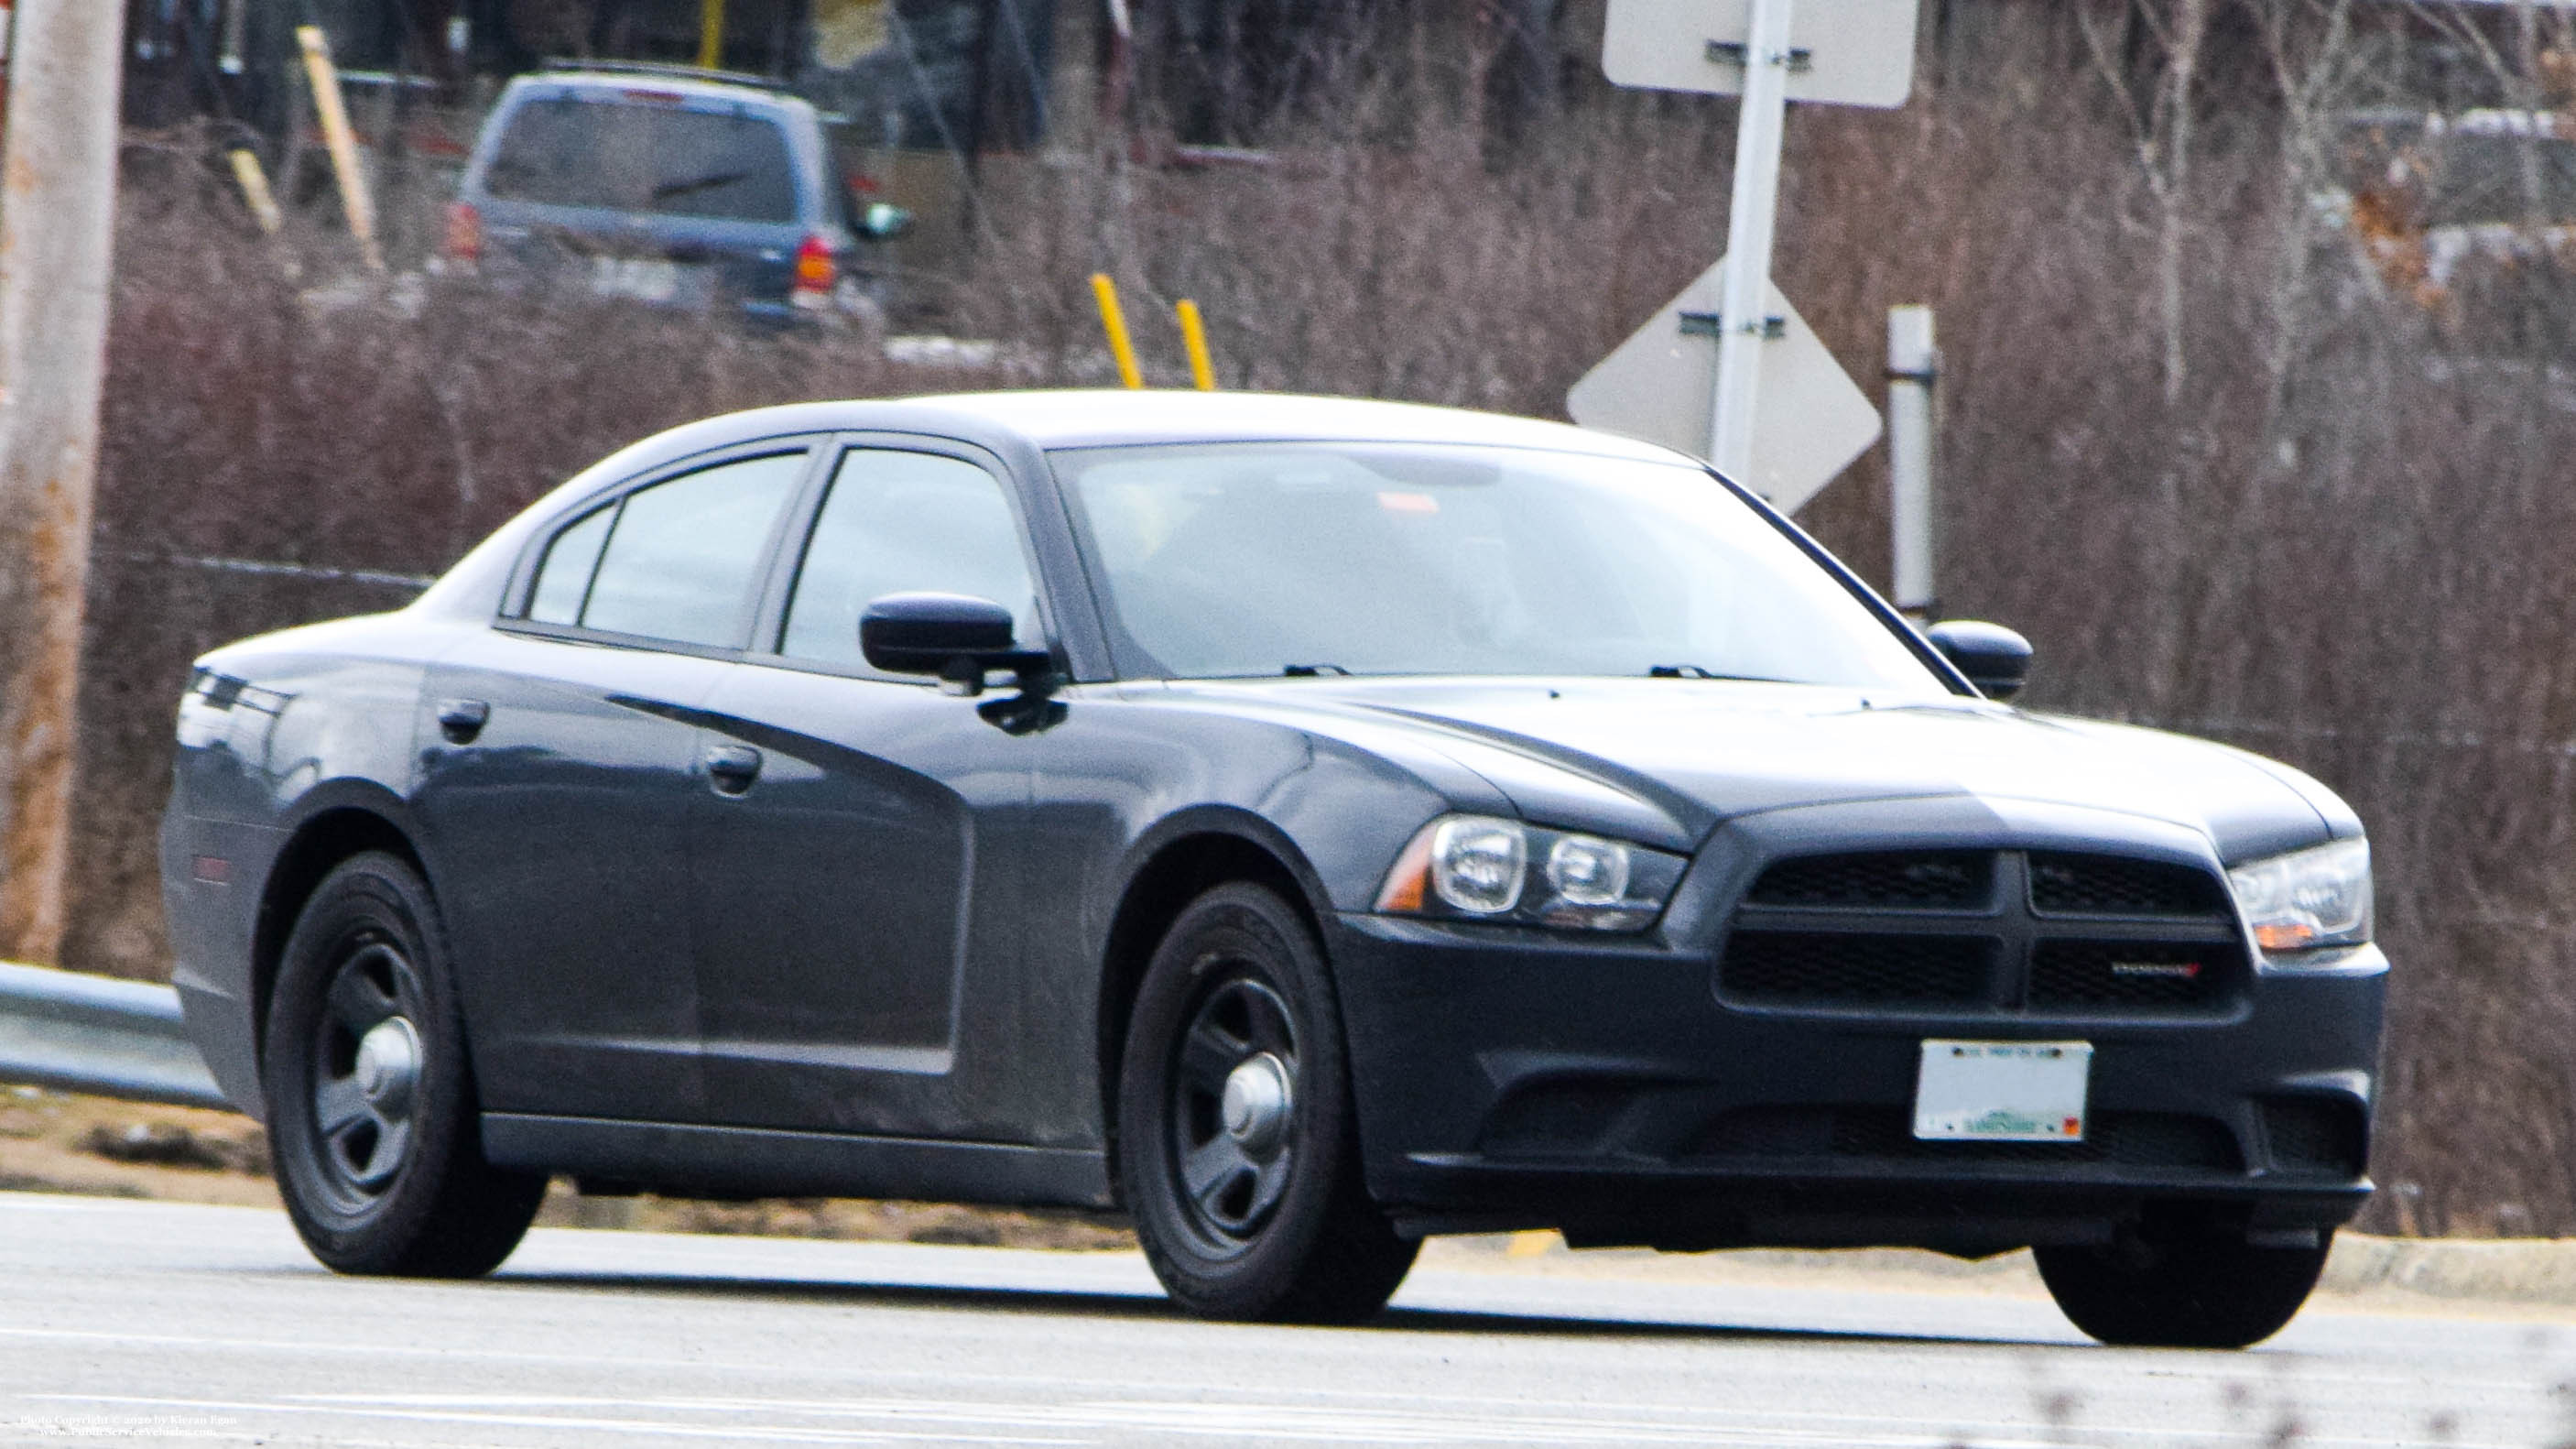 A photo  of New Hampshire State Police
            Cruiser 450, a 2011-2014 Dodge Charger             taken by Kieran Egan